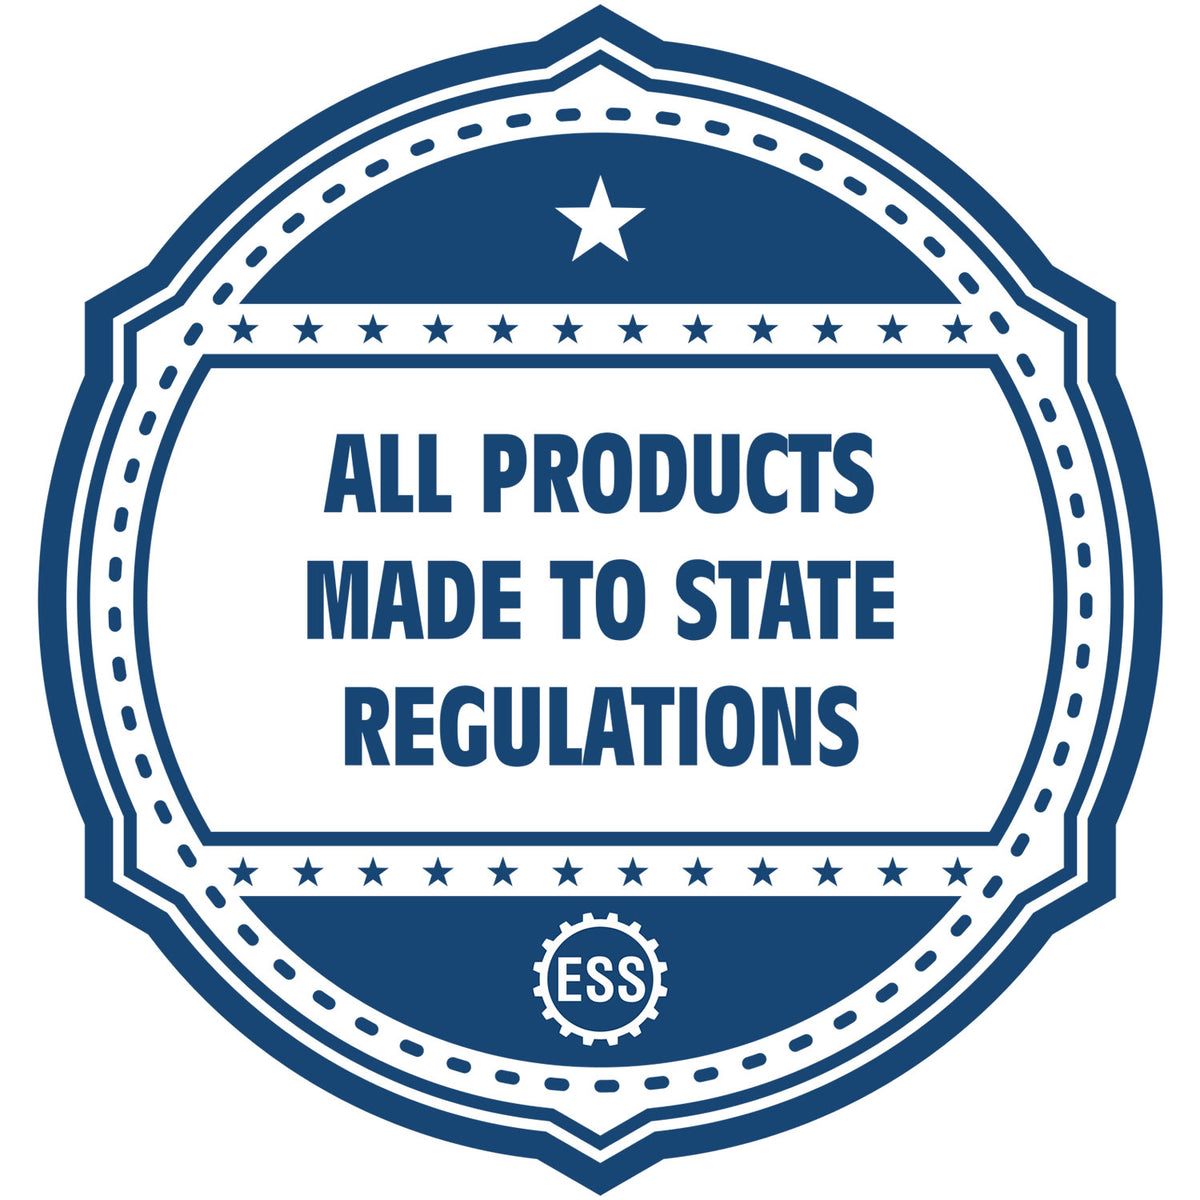 An icon or badge element for the Georgia Desk Architect Embossing Seal showing that this product is made in compliance with state regulations.